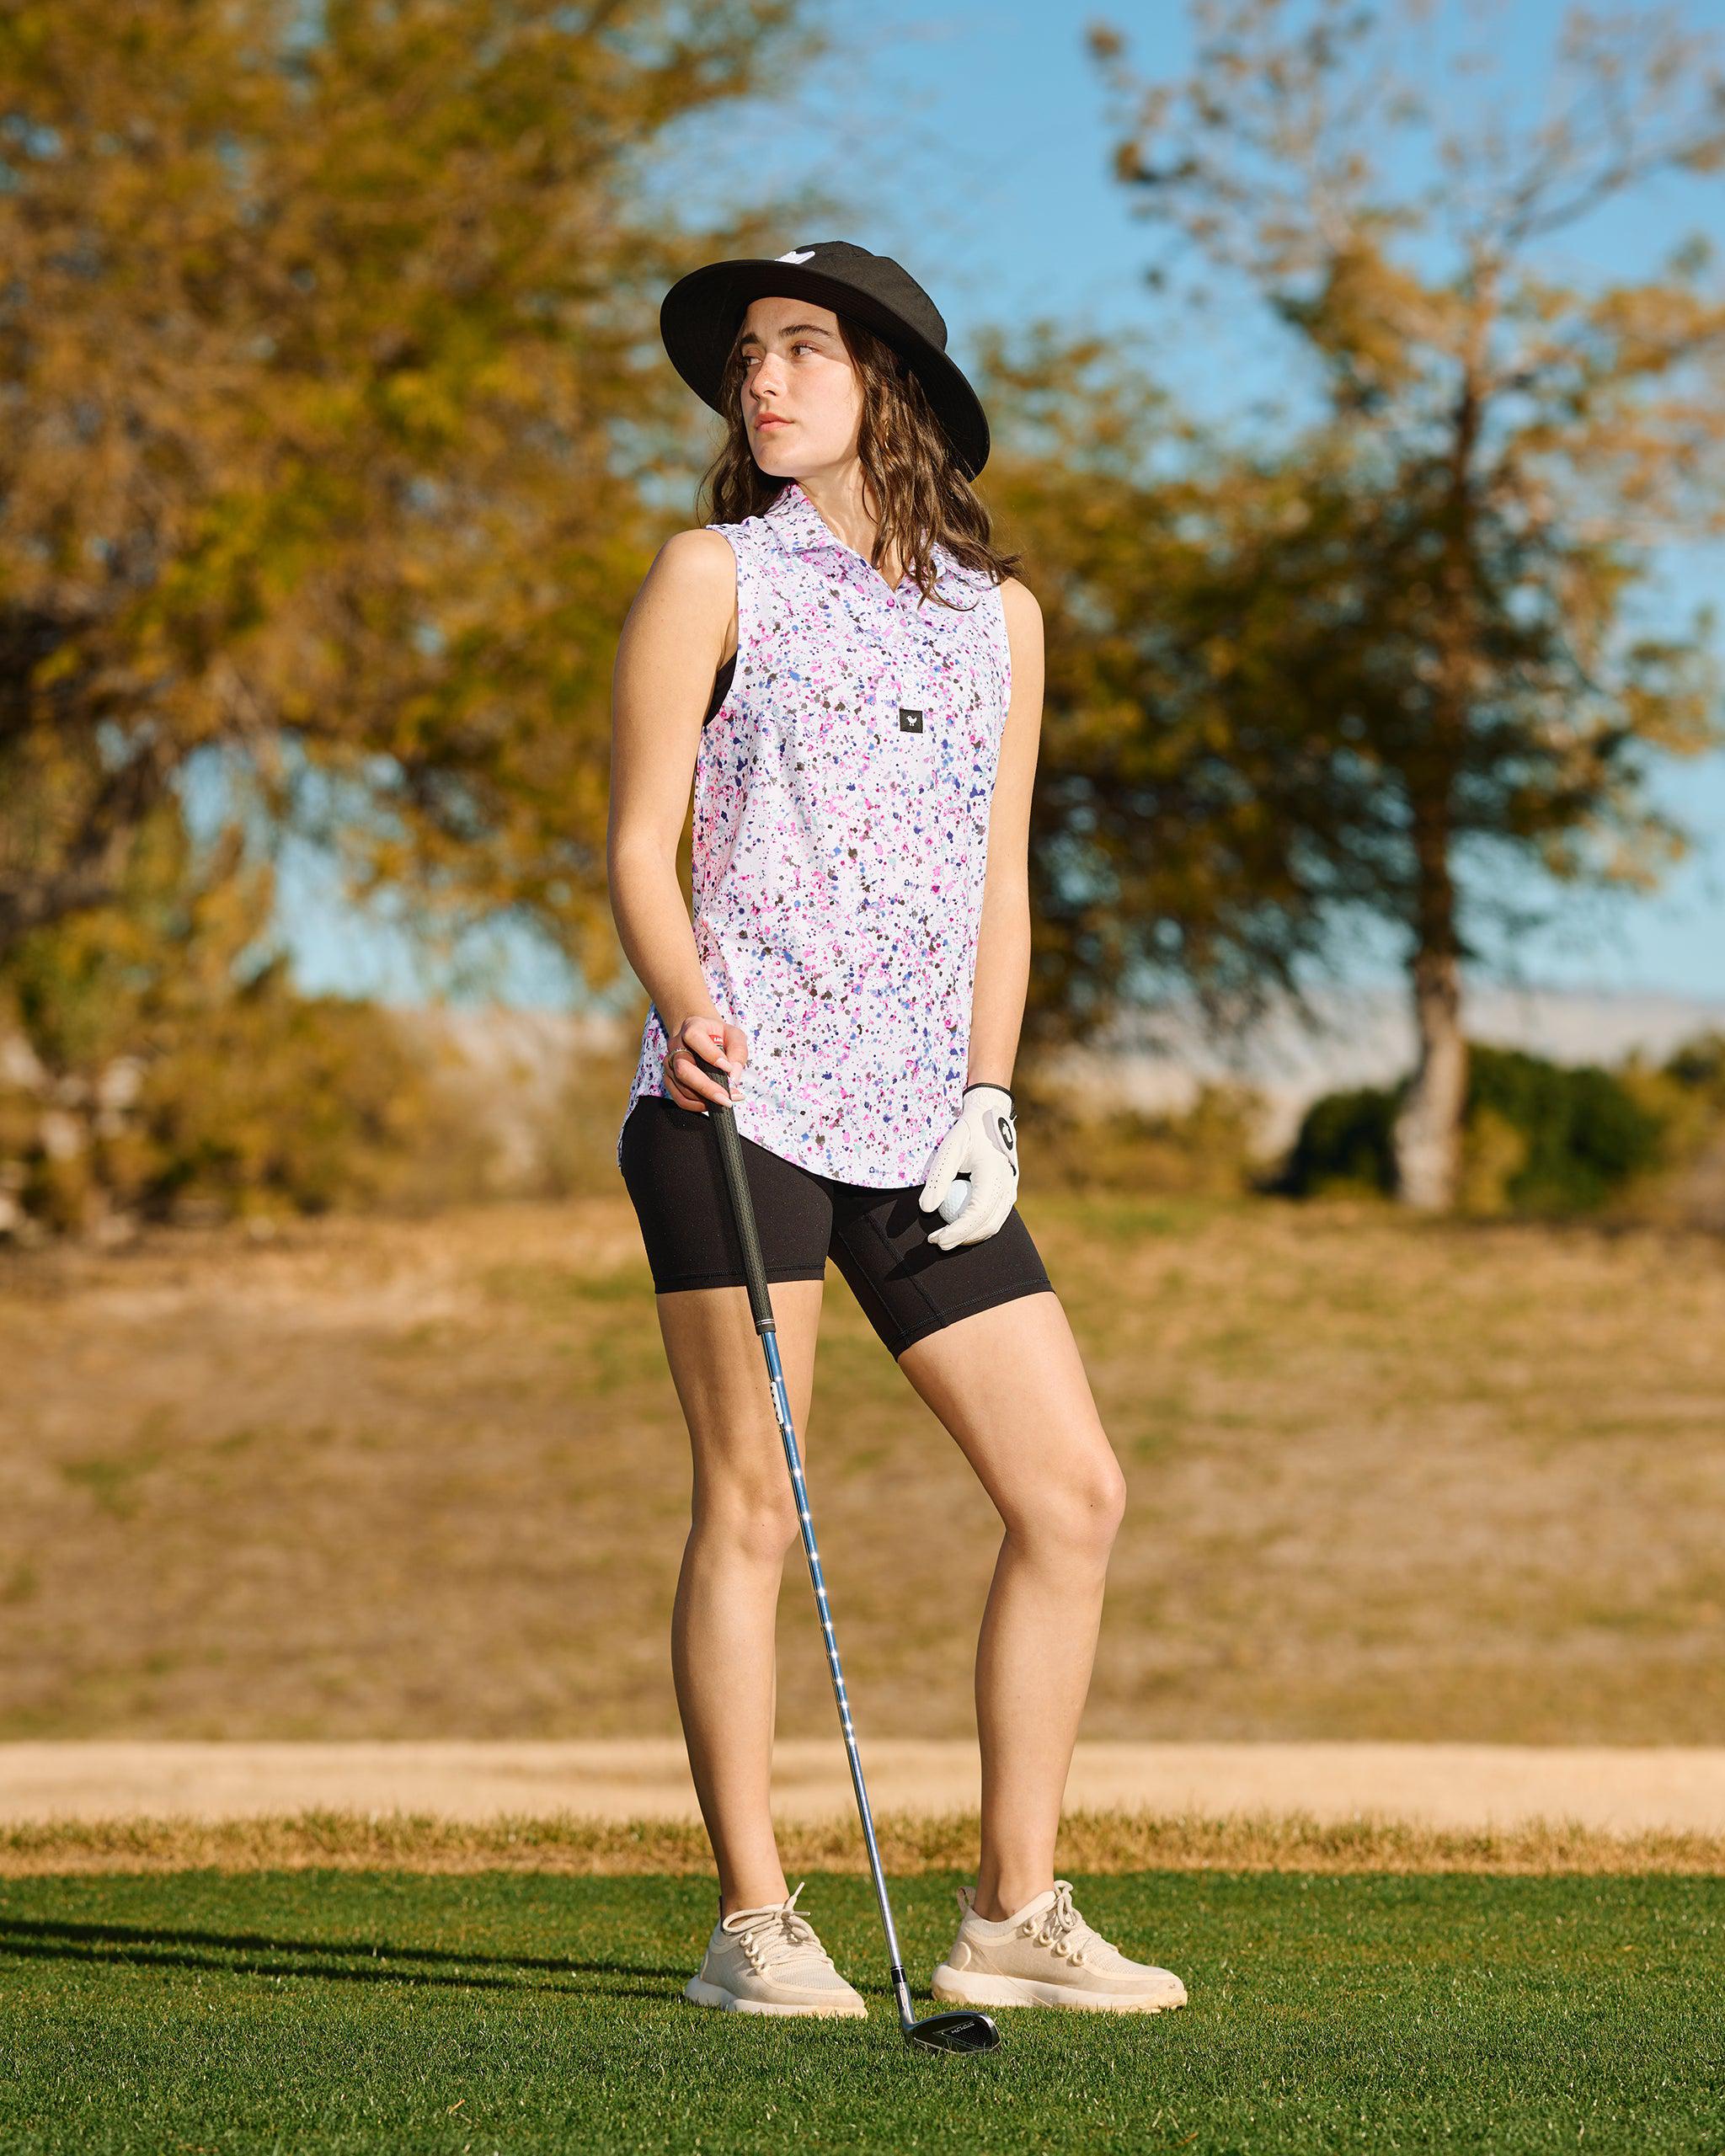 Women's golf clothes: Step into Spring